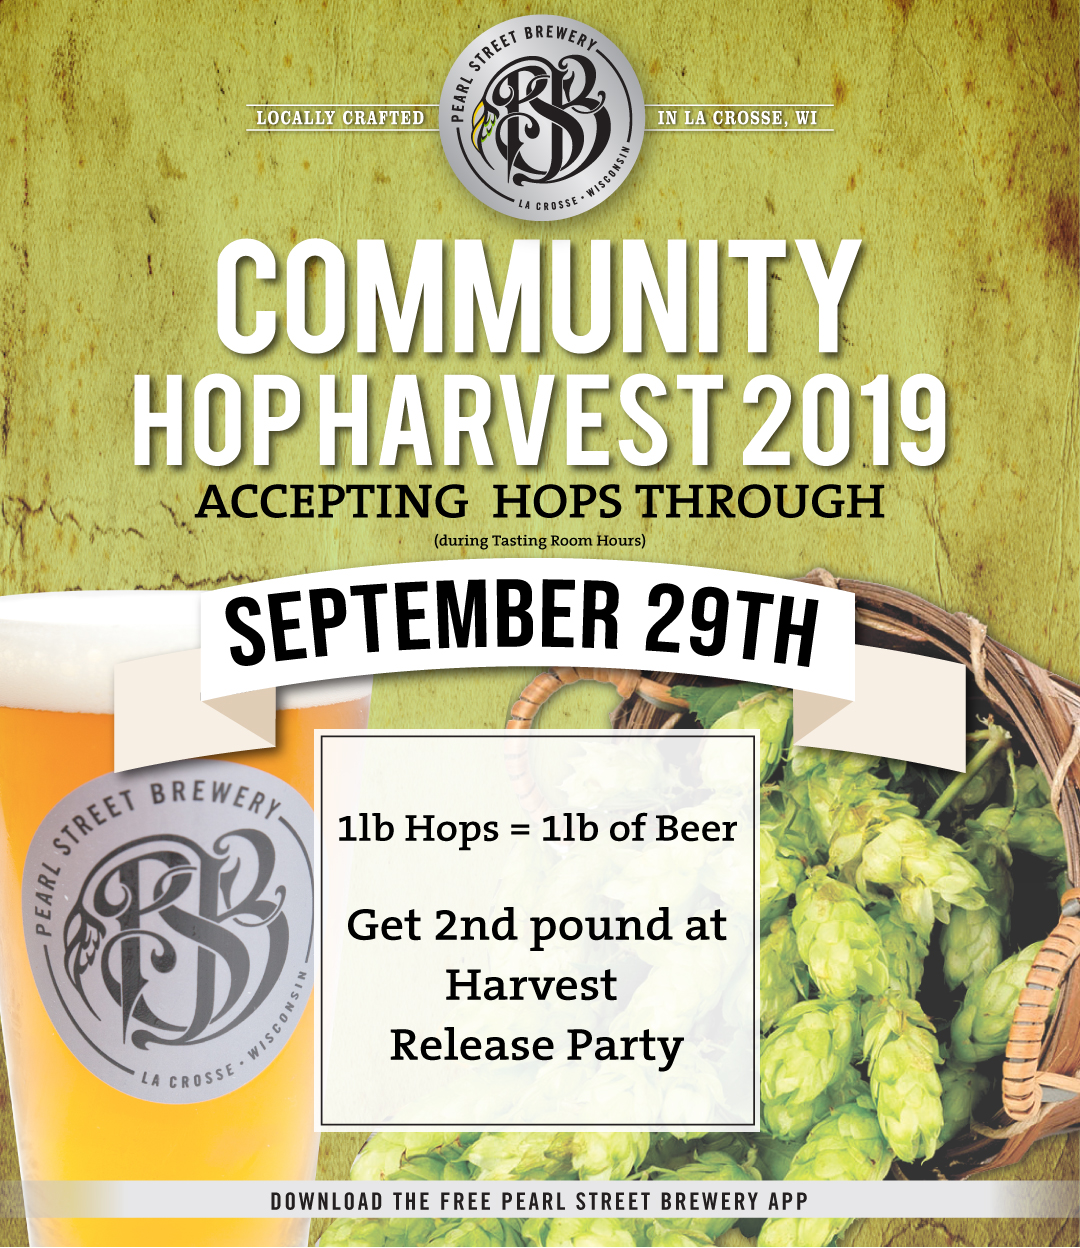 Pearl Street Brewery is collecting hops for its yearly Community Hop Harvest